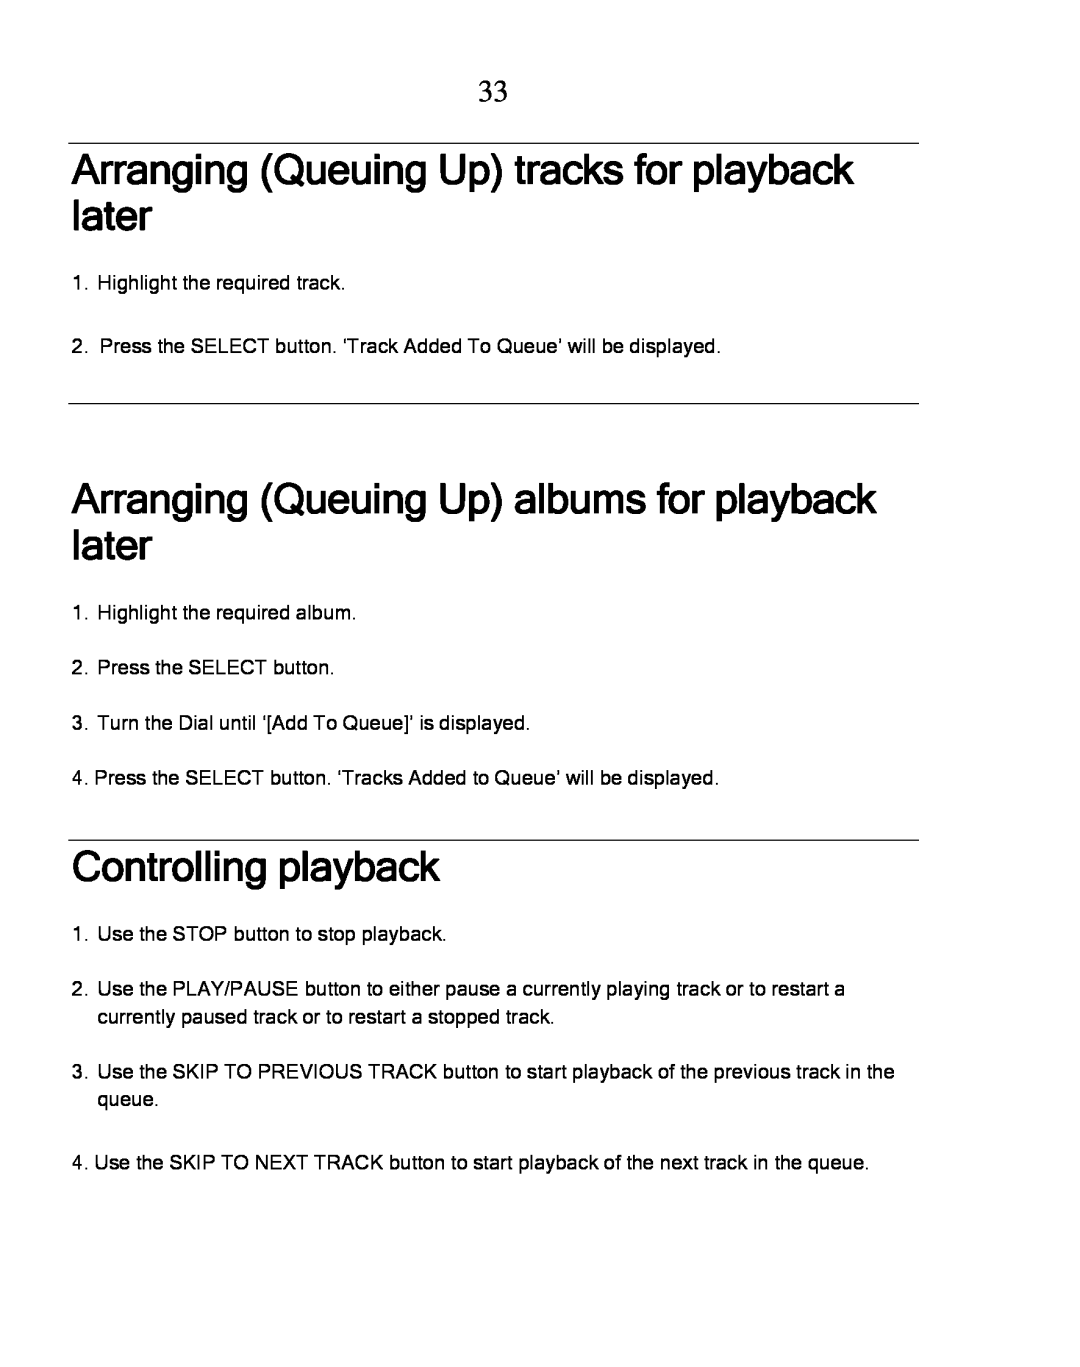 Grace GDI-IRDT200 manual Arranging Queuing Up tracks for playback later, Arranging Queuing Up albums for playback later 